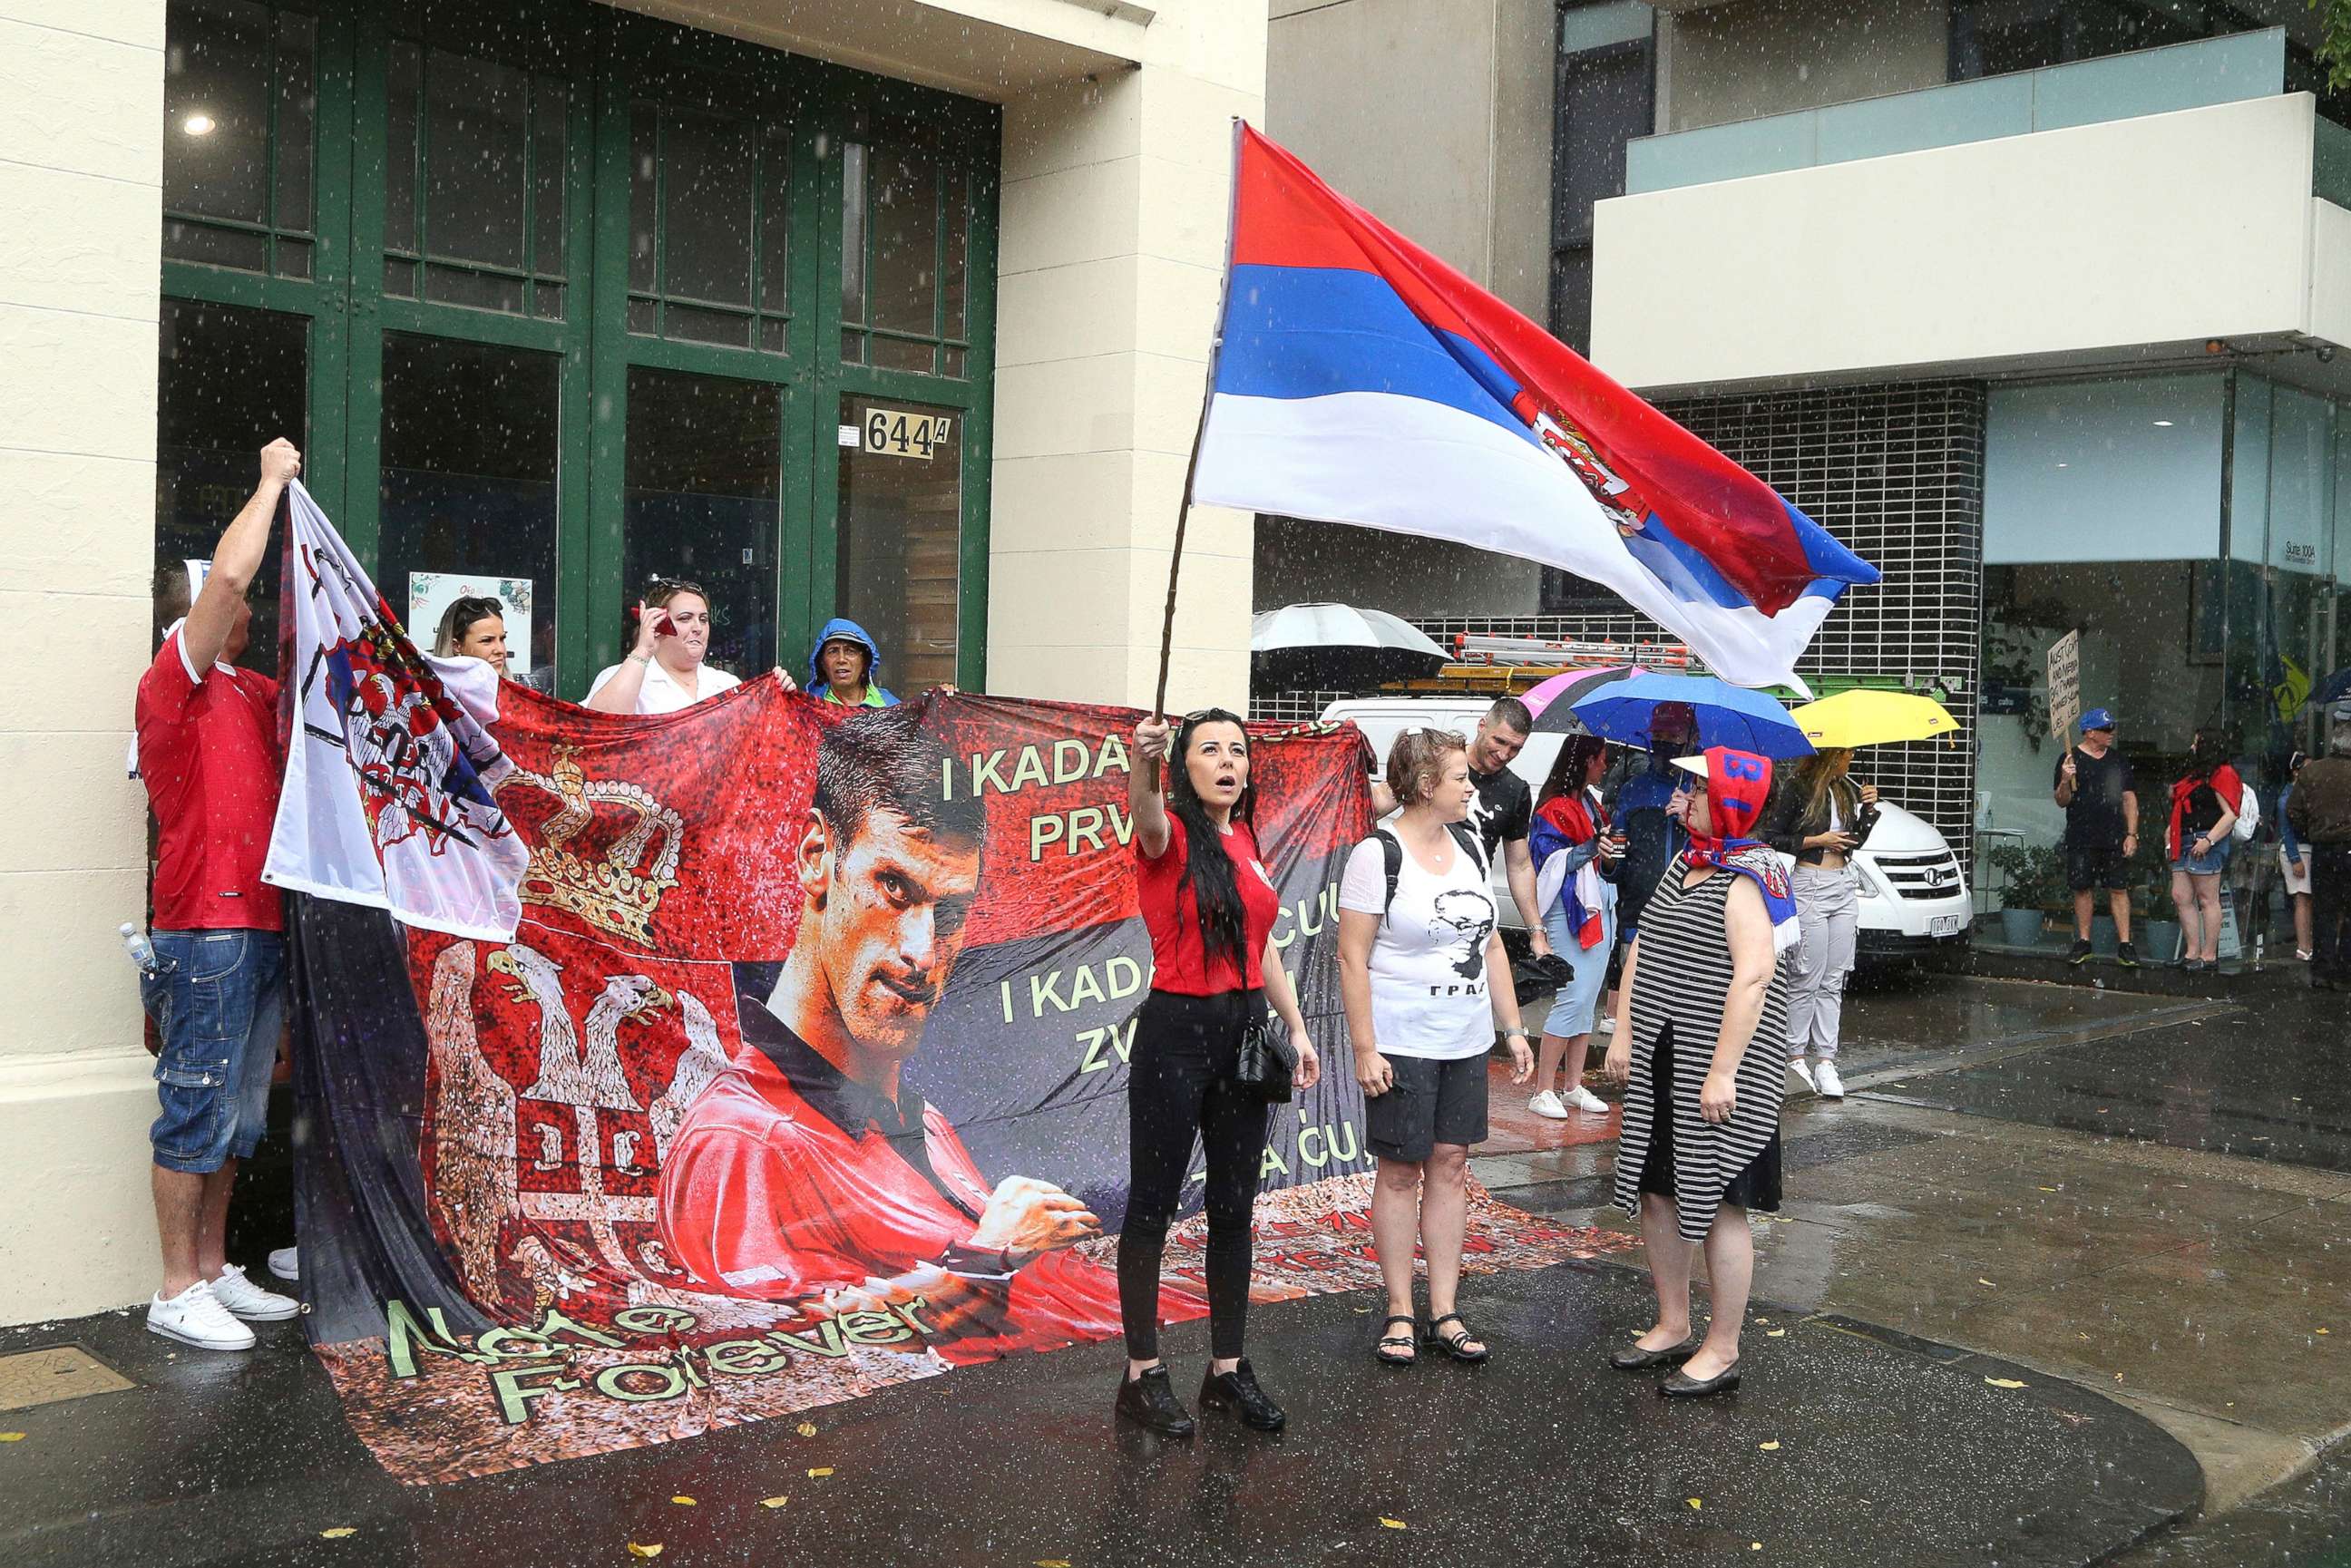 PHOTO: Djokovic supporters gather outside an immigration detention hotel where Serbia's Novak Djokovic is believed to be staying in Melbourne, Australia, Jan. 7, 2022.